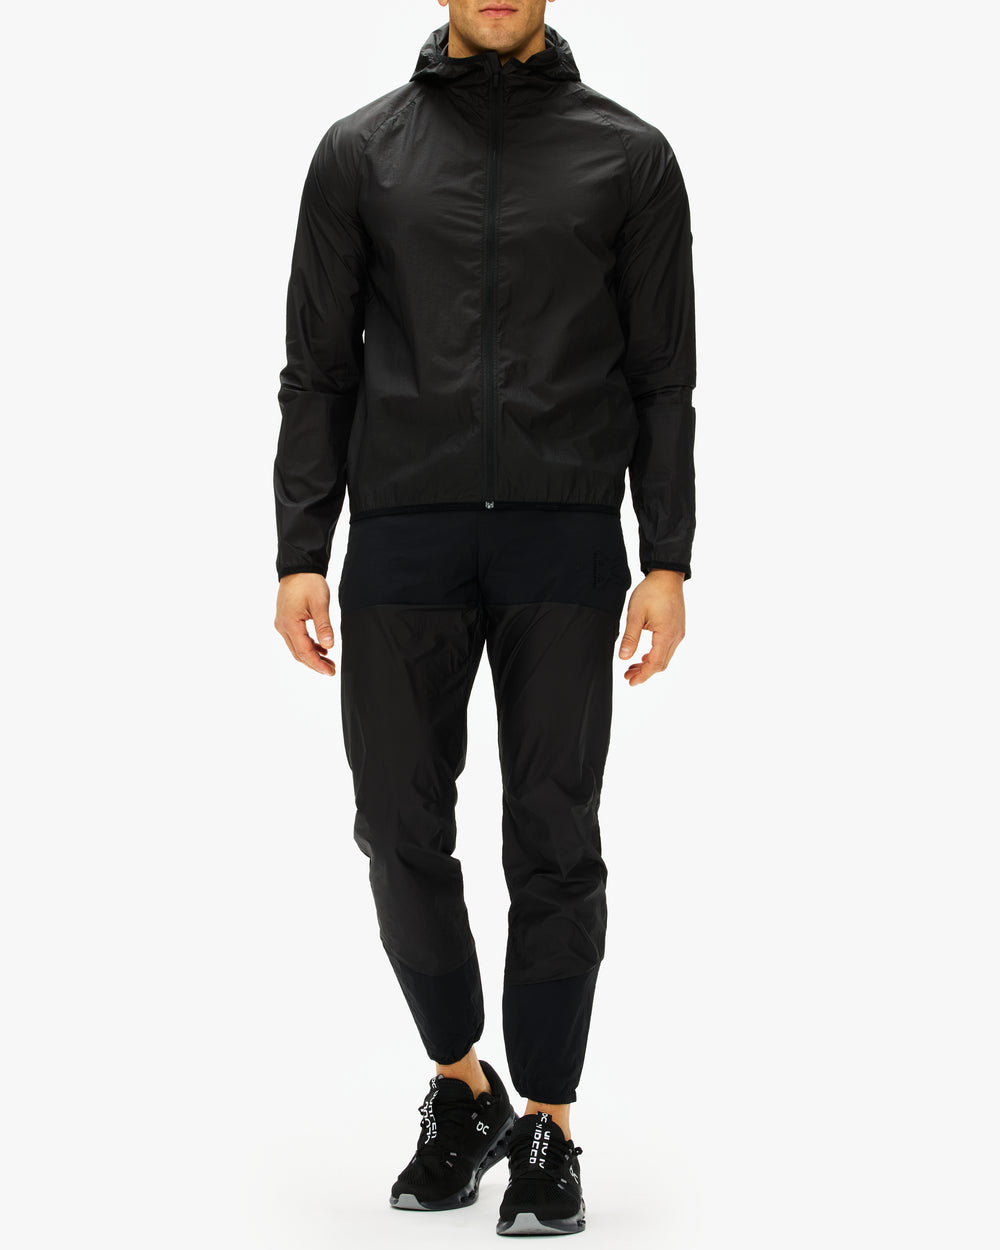 District Vision Ultralight Dwr Paneled Track Pants